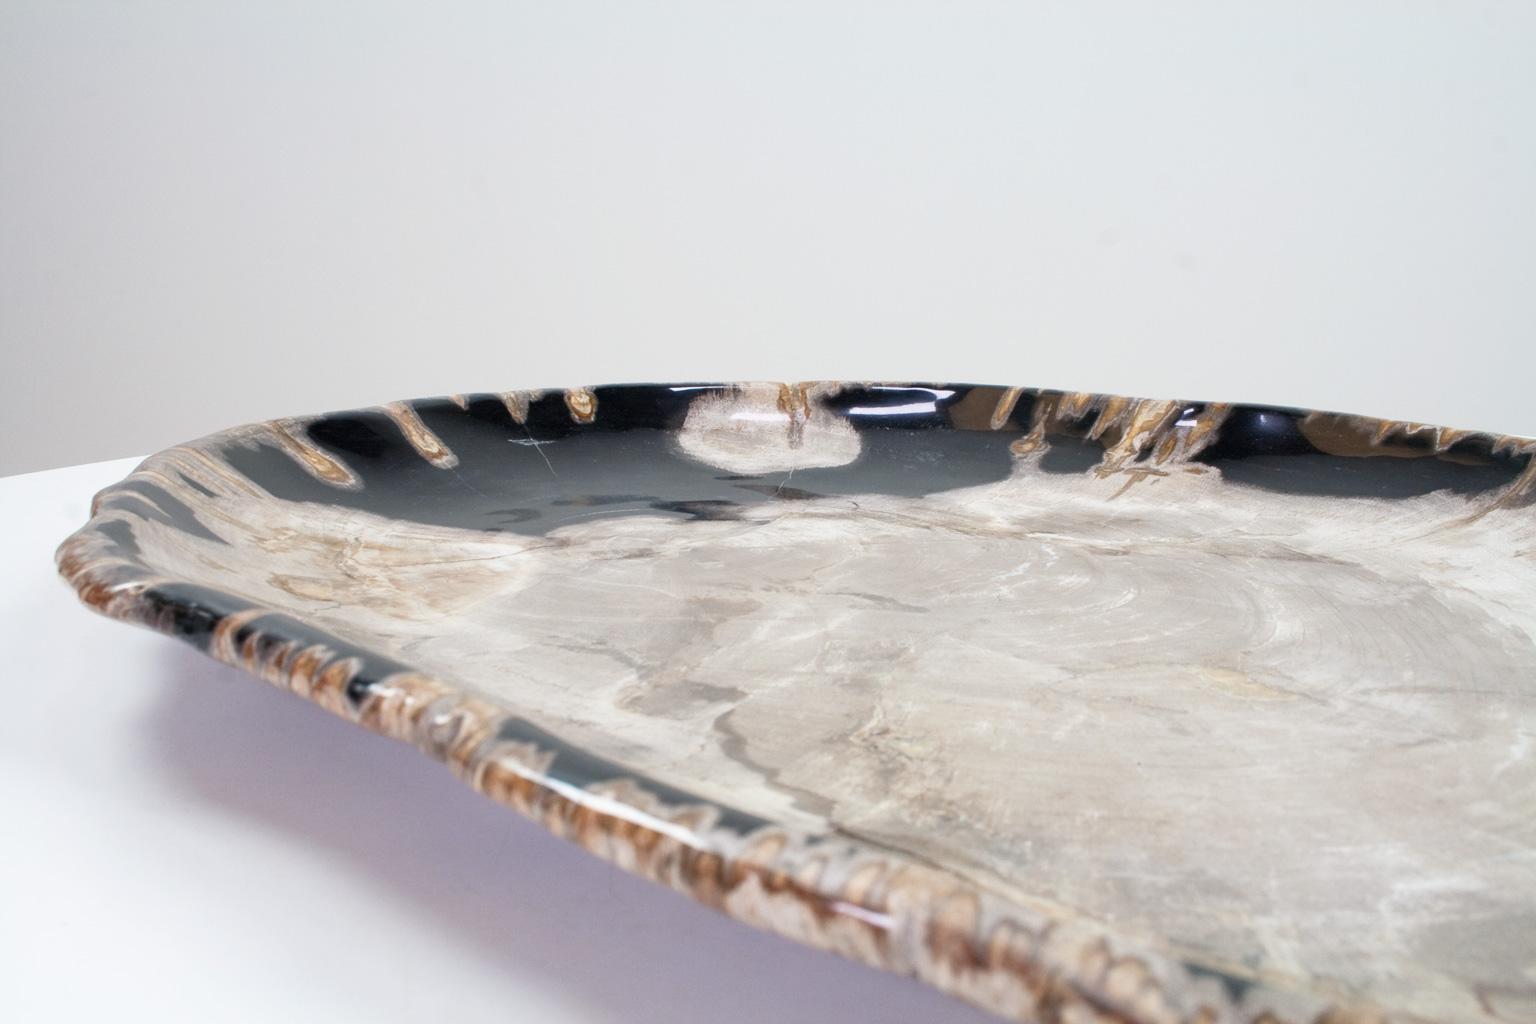 Indonesian Very Large Petrified Wood Plate or Flat Tray, Home Accessory of Organic Origin